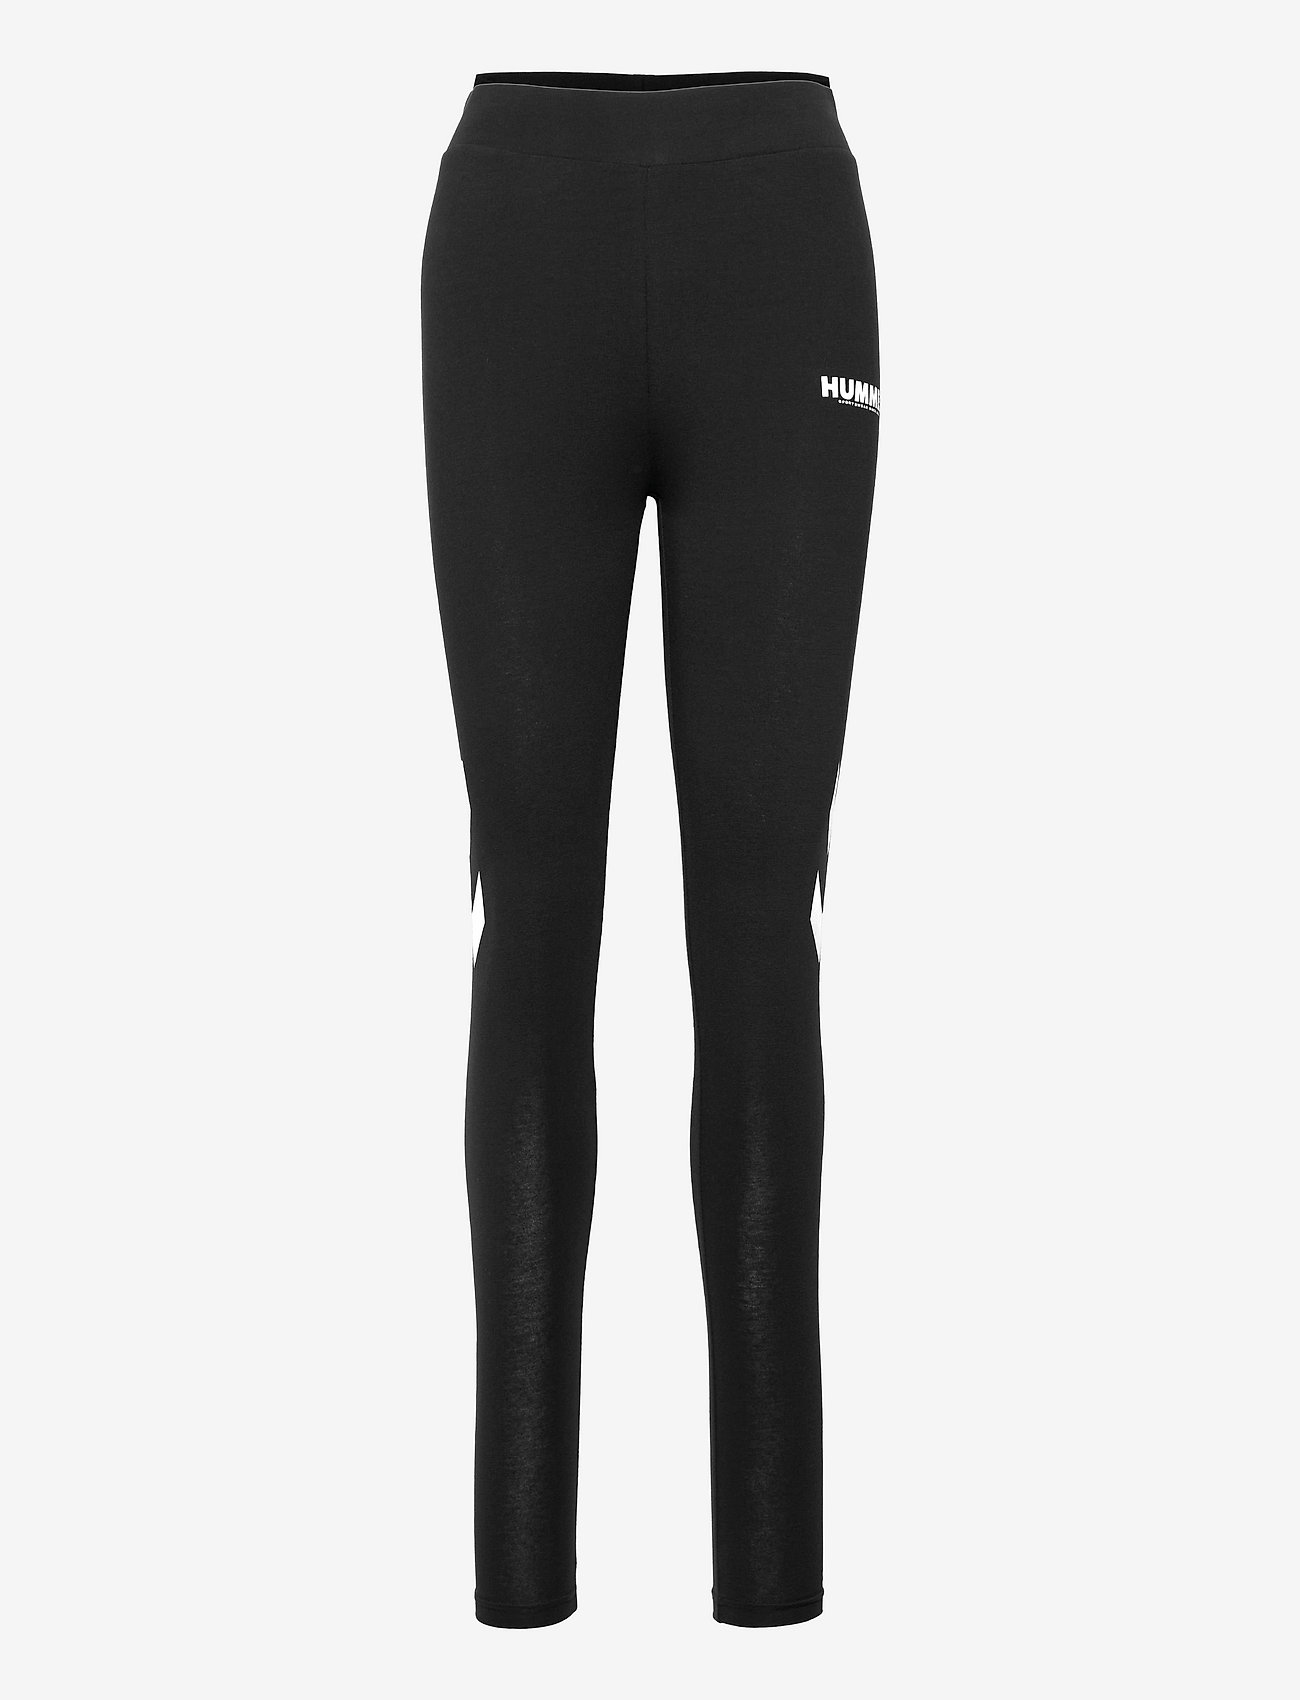 Hummel - hmlLEGACY WOMAN HIGH WAIST TIGHTS - lowest prices - black - 0